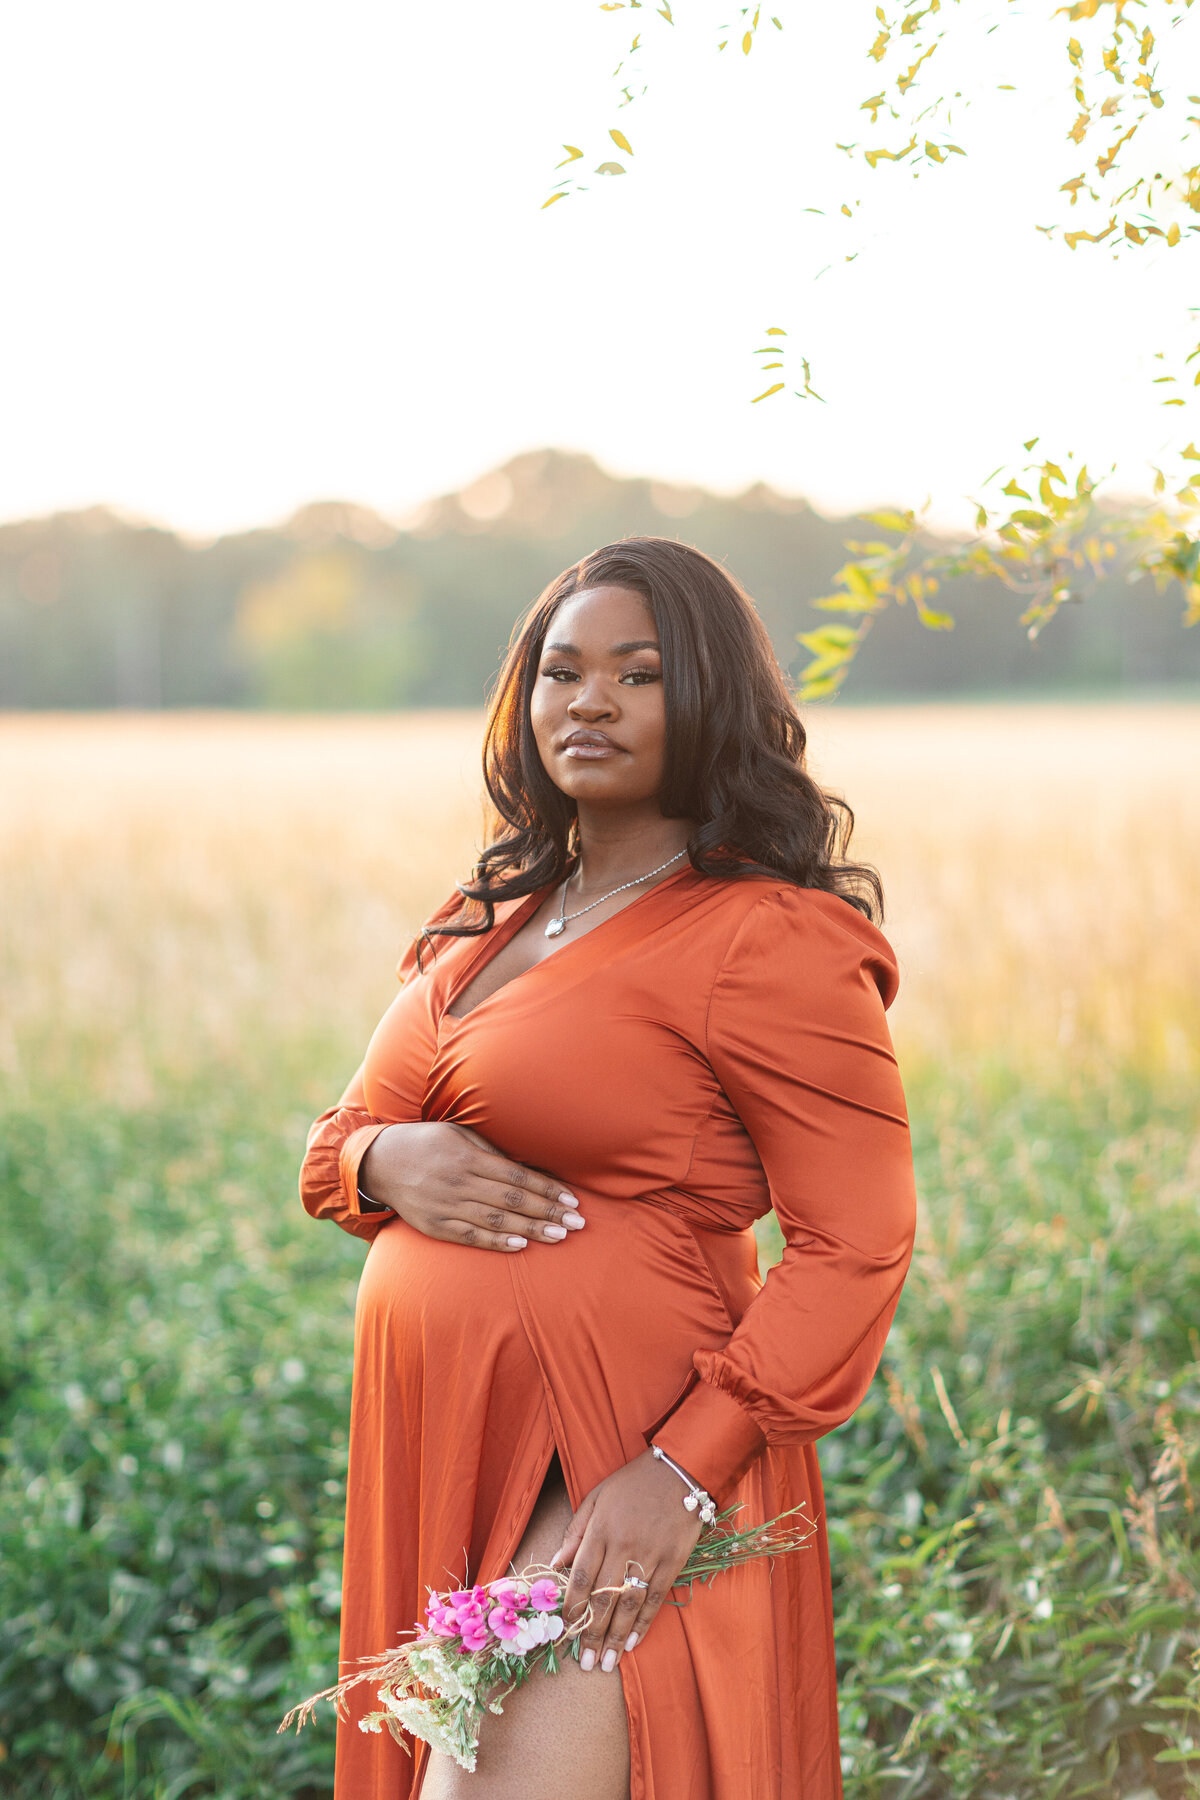 Maternity session during golden hour surrounded by grassy fields.